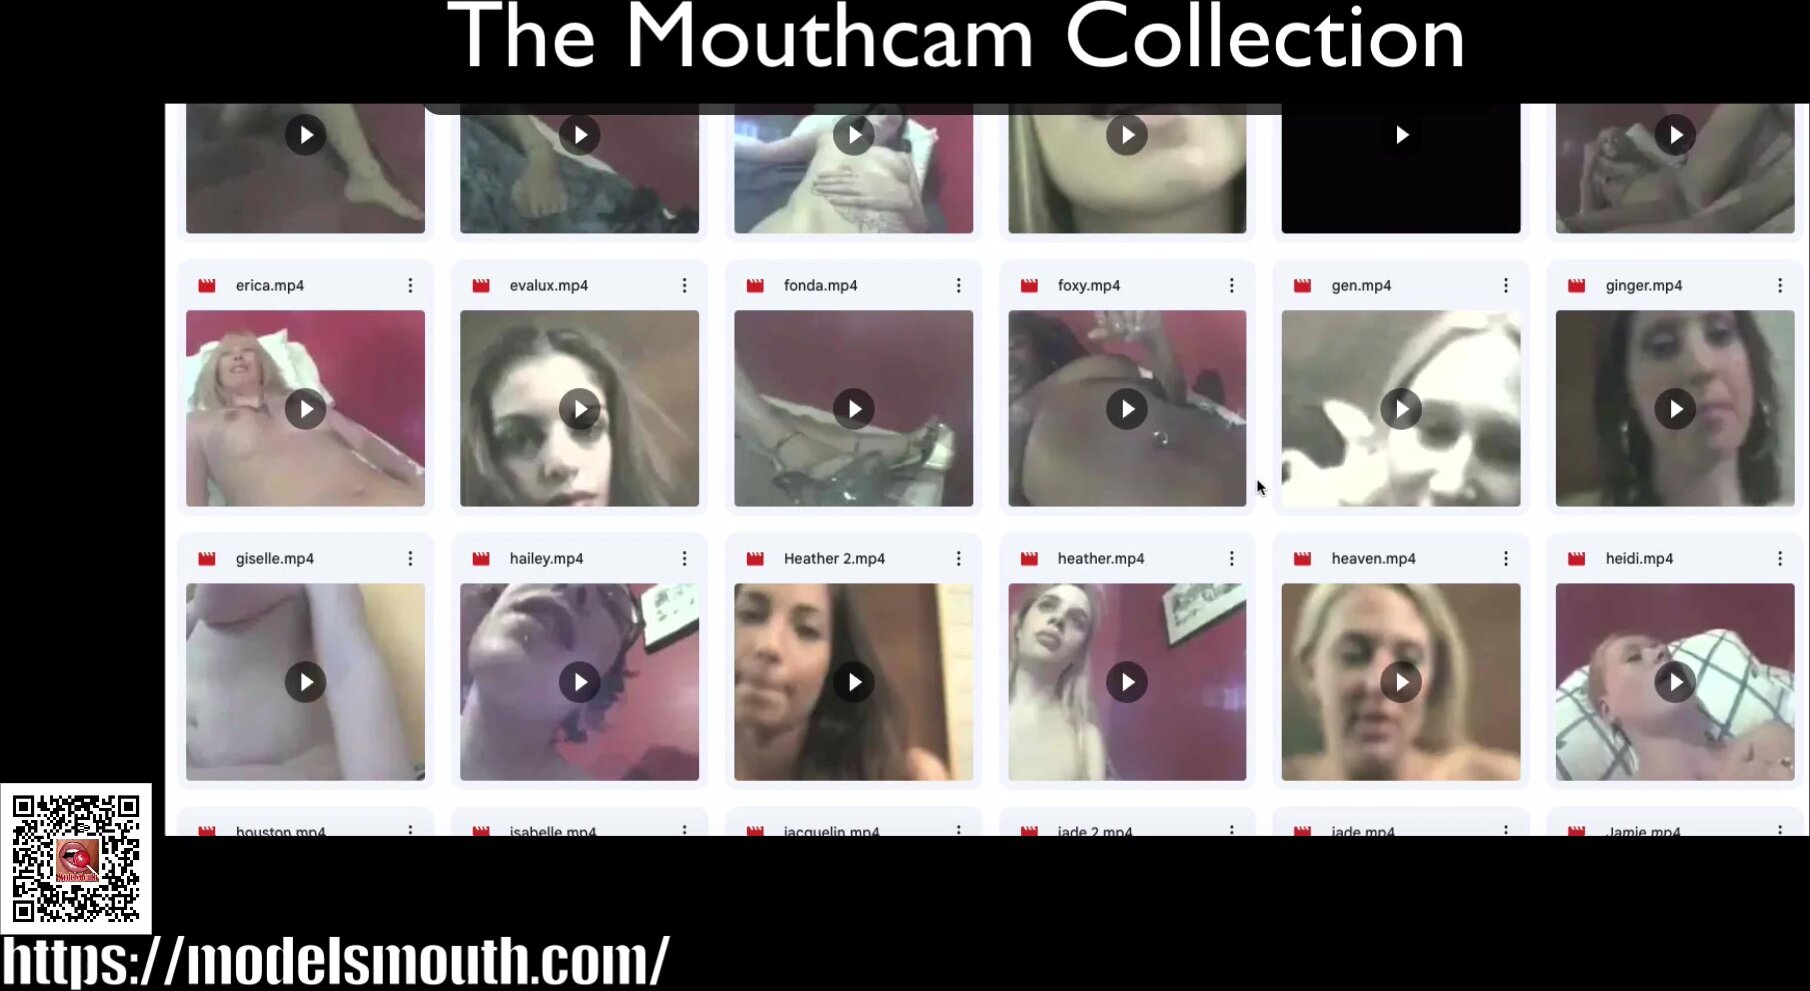 The Mouthcam Collection